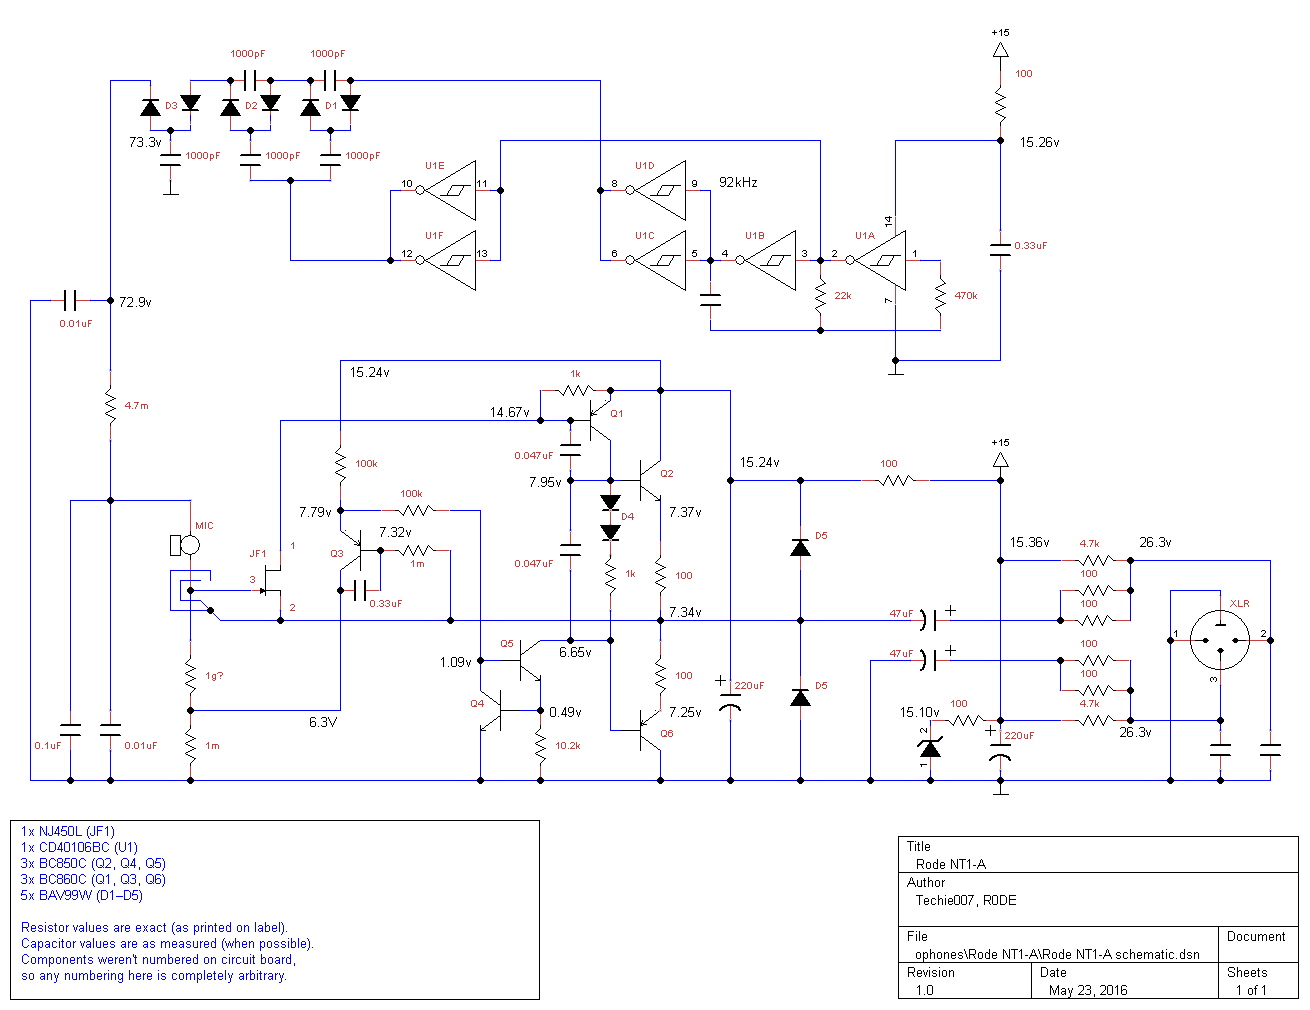 Rode%20NT1-A%20schematic.png